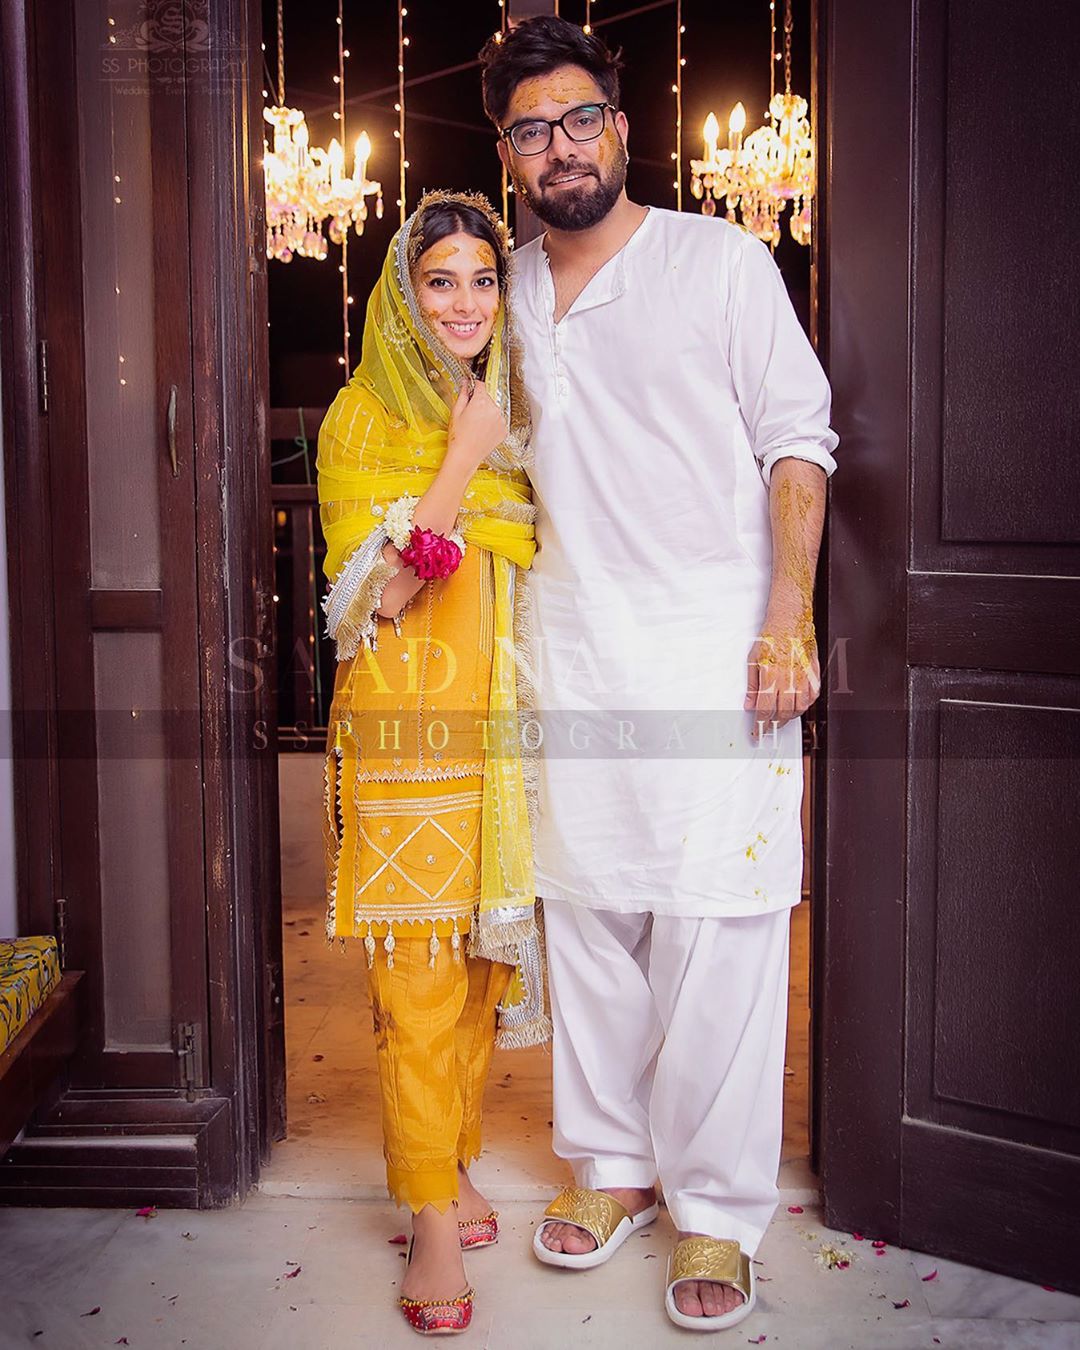 Beautiful pictures from Iqra Aziz and Yasir Hussain's Mayun